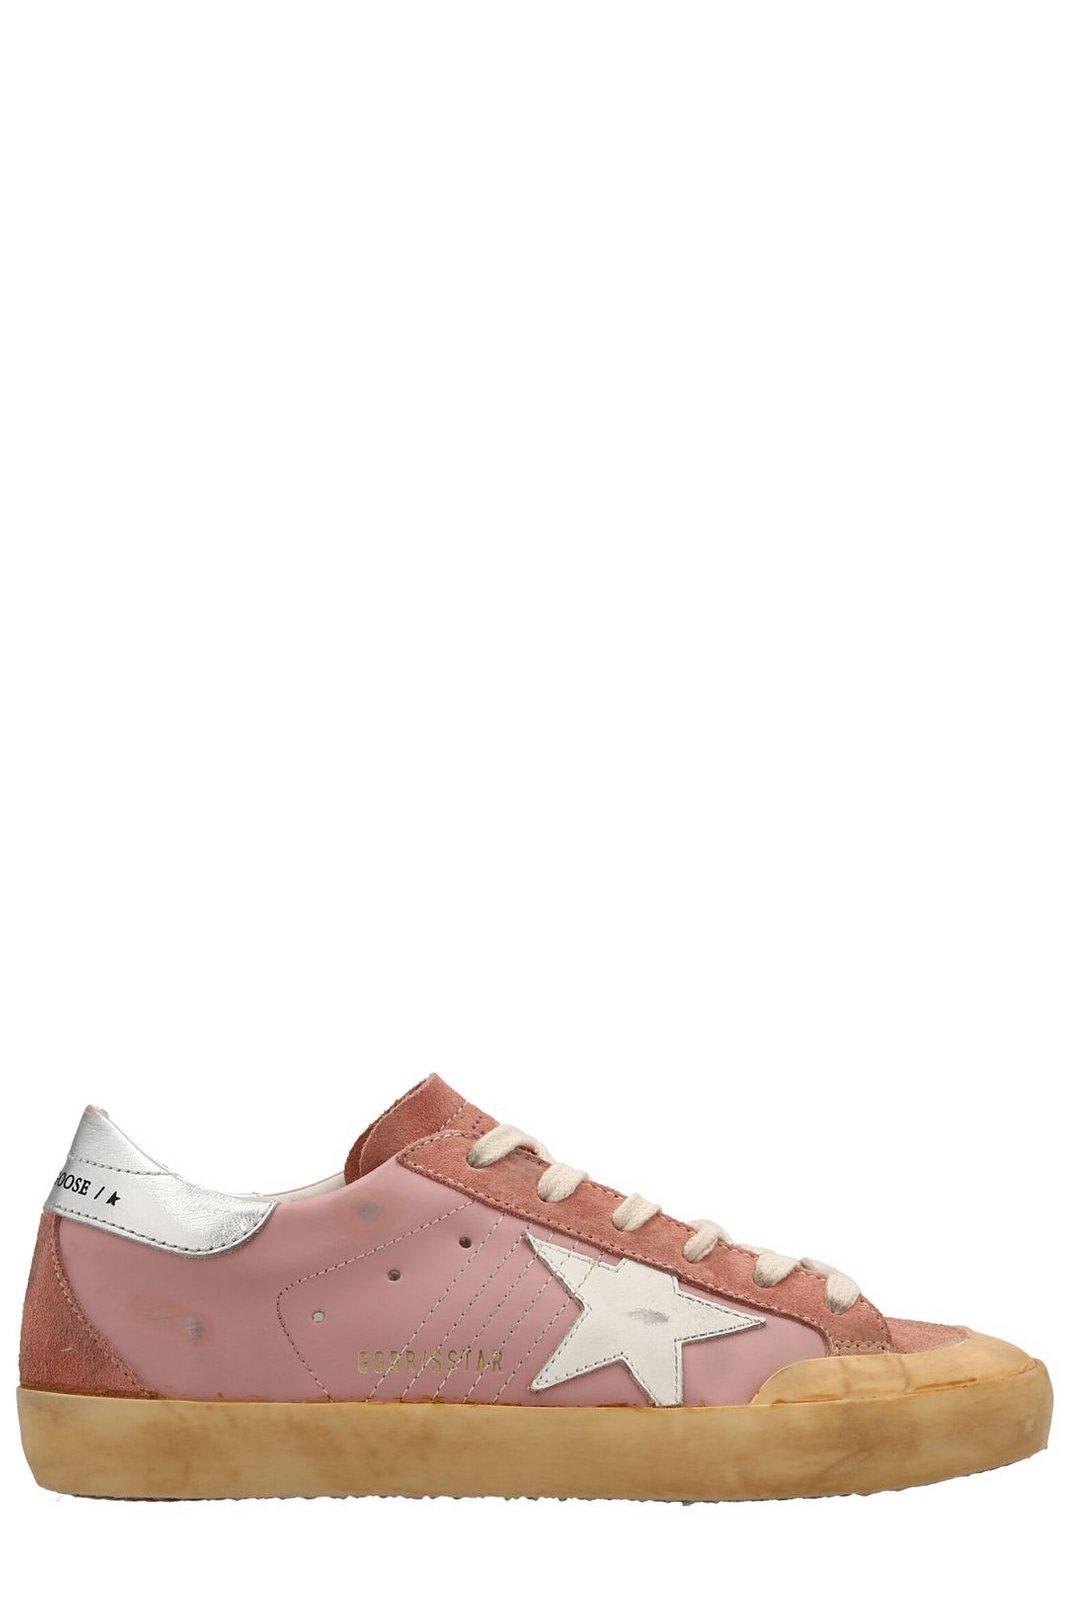 Golden Goose Super Lace-up Sneakers